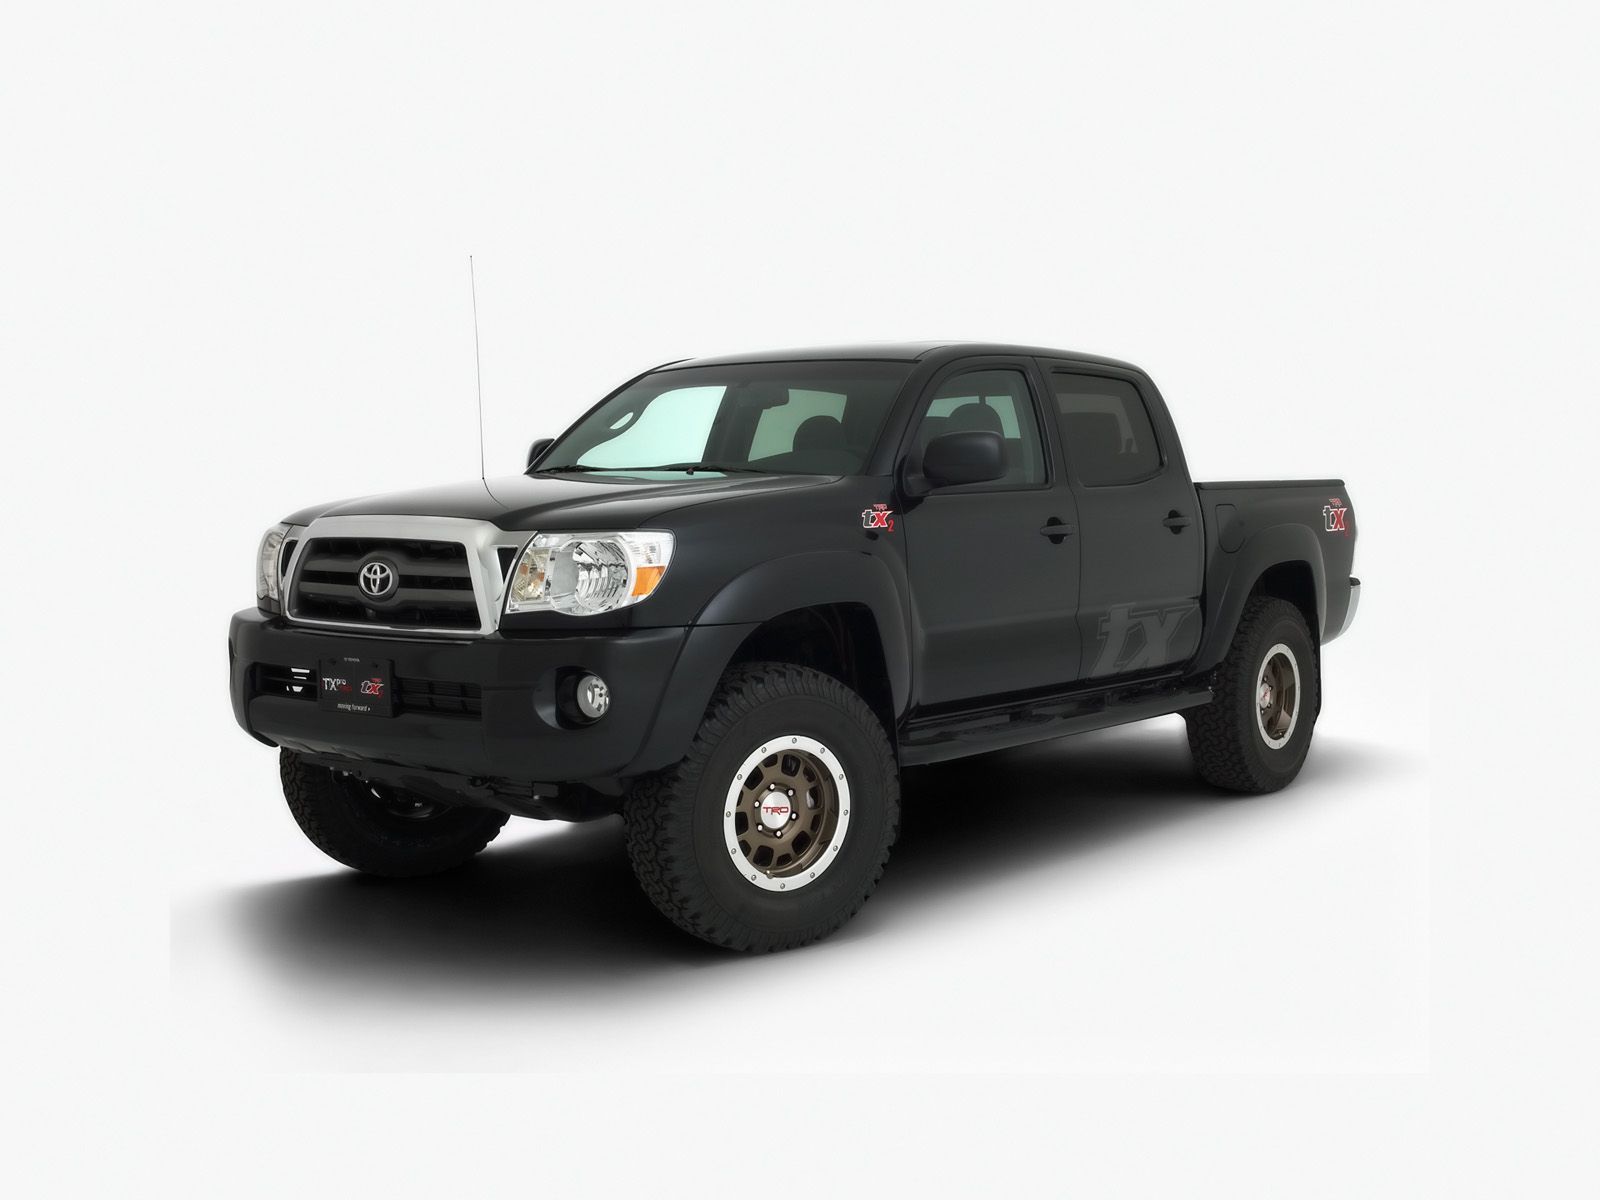 2009 Toyota Tacoma TX Package - Front Angle - 1600x1200 - Wallpaper